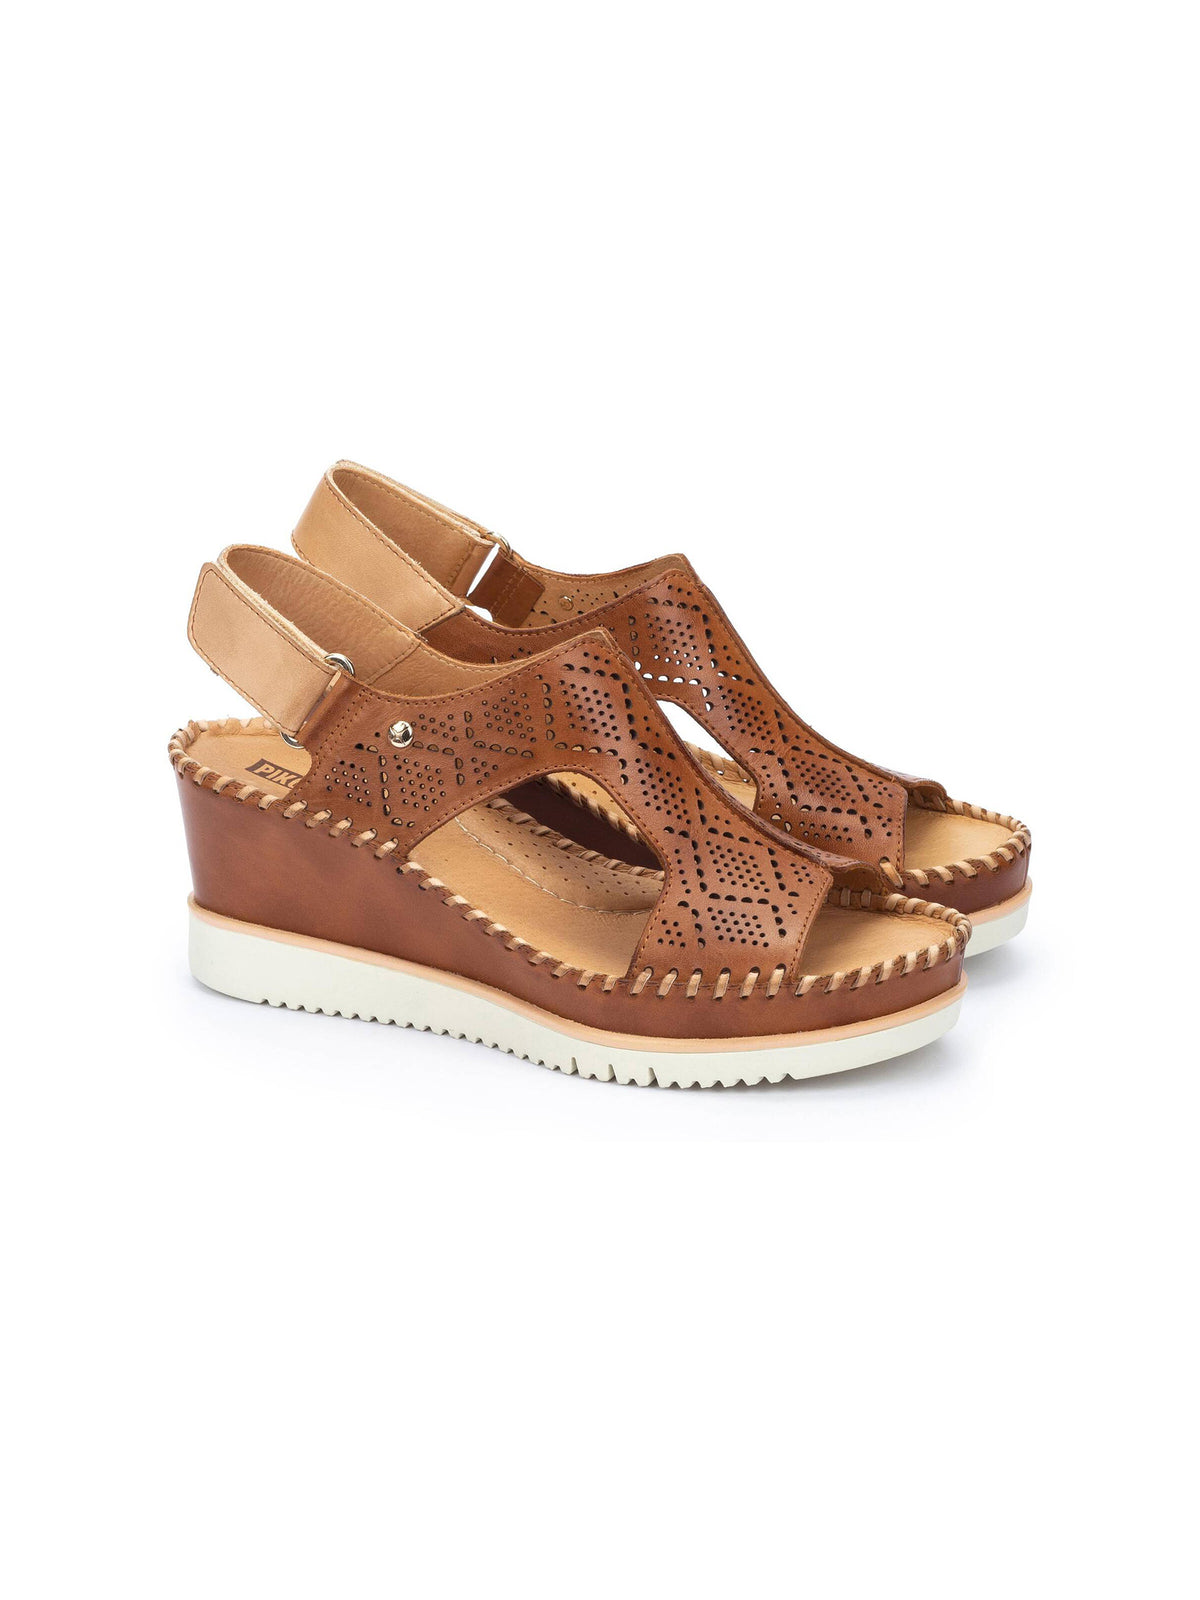 pikolinos aguadulce wedge sandals in brandy-pair view